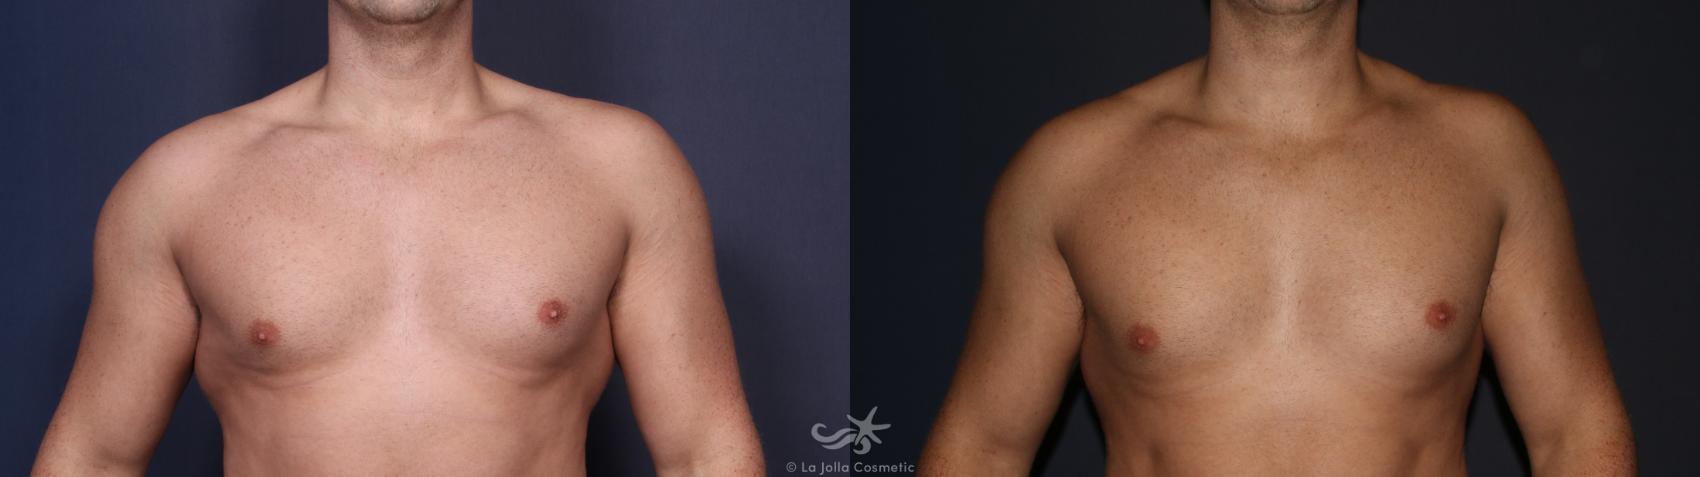 Before & After High Definition Liposuction Result 125 Front View in San Diego, CA